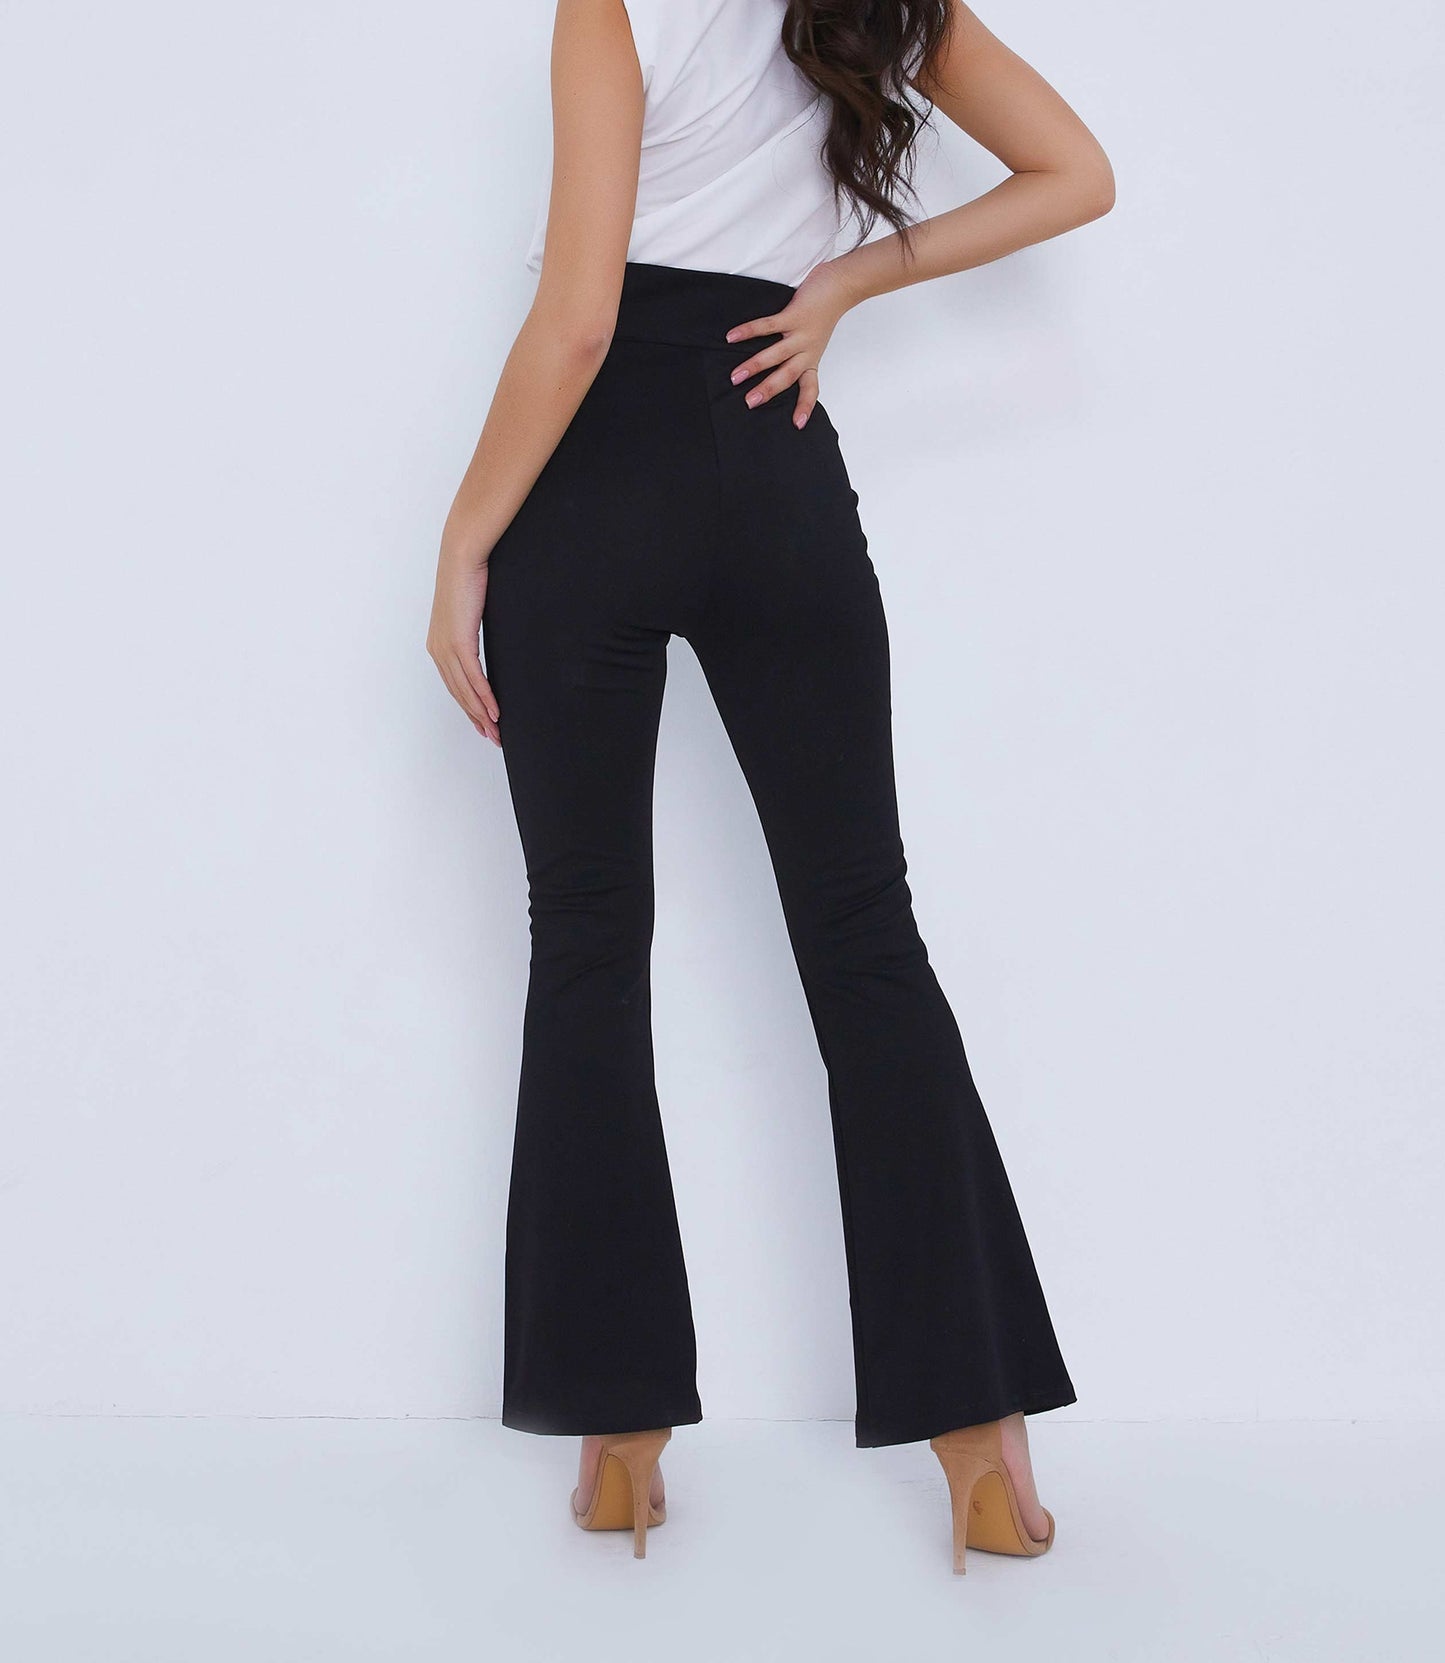 Black High waisted flare trousers